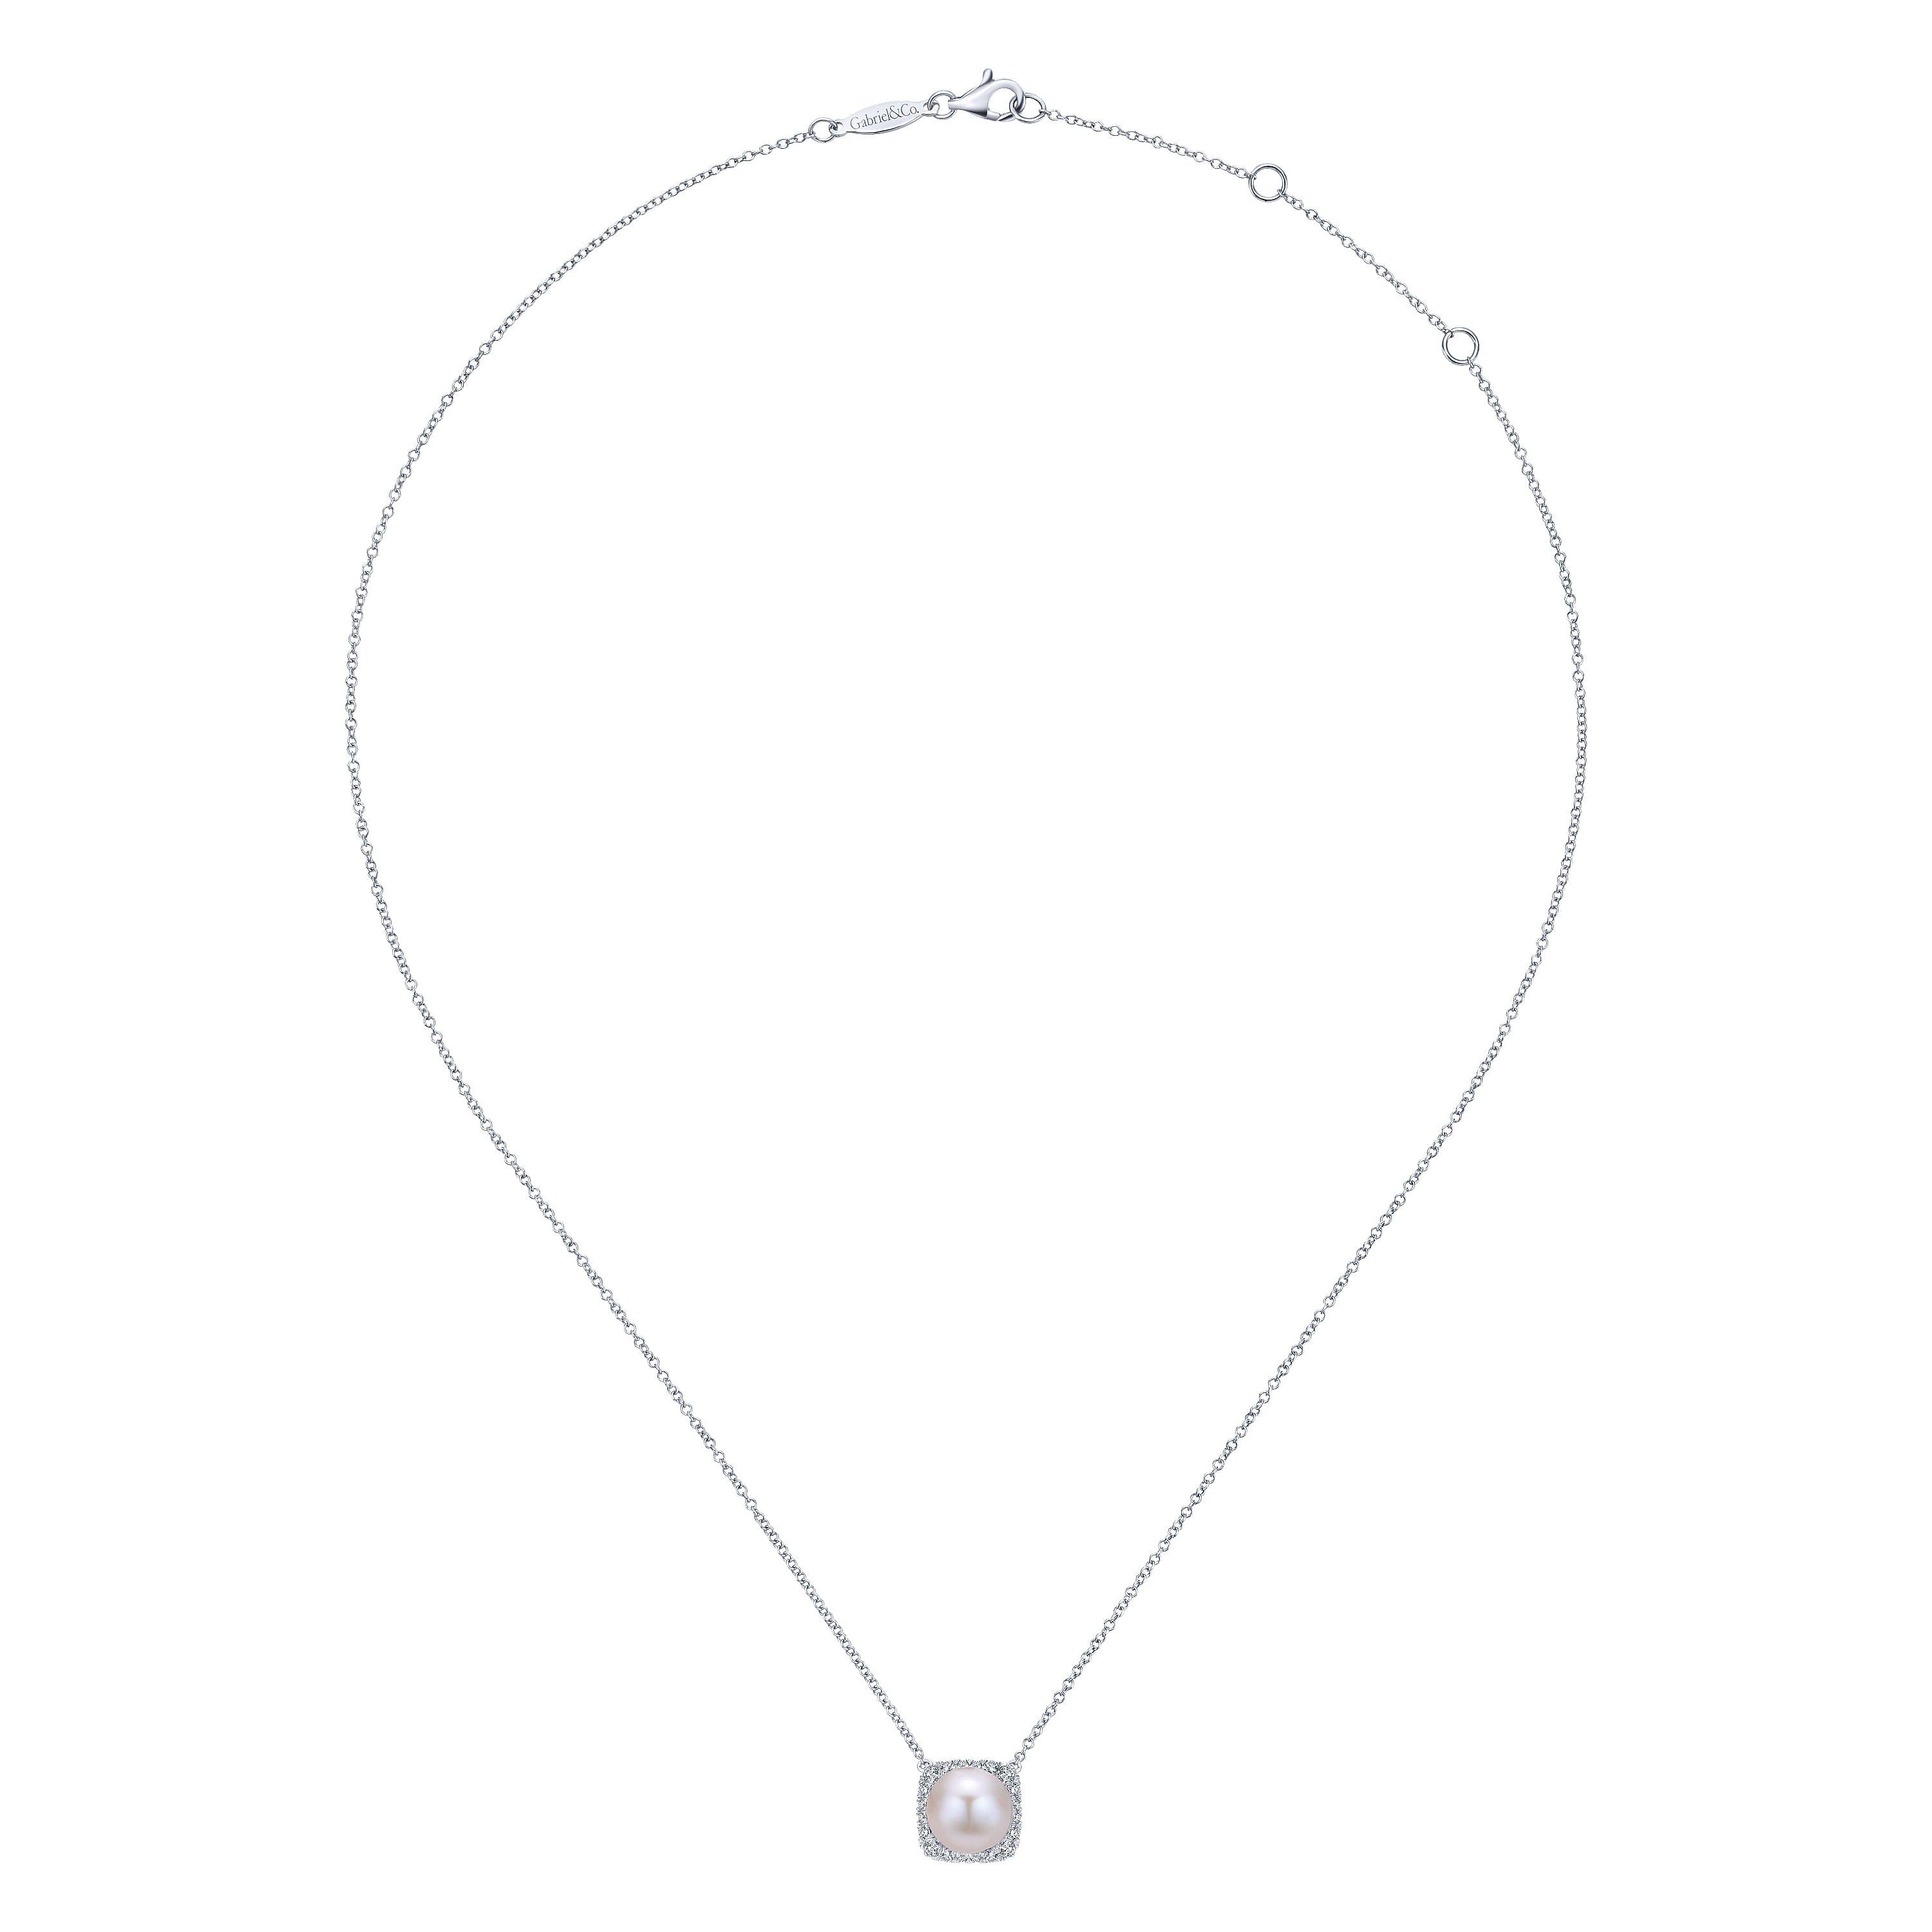 14K White Gold Round Cultured Pearl and Diamond Cushion Halo Pendant Necklace